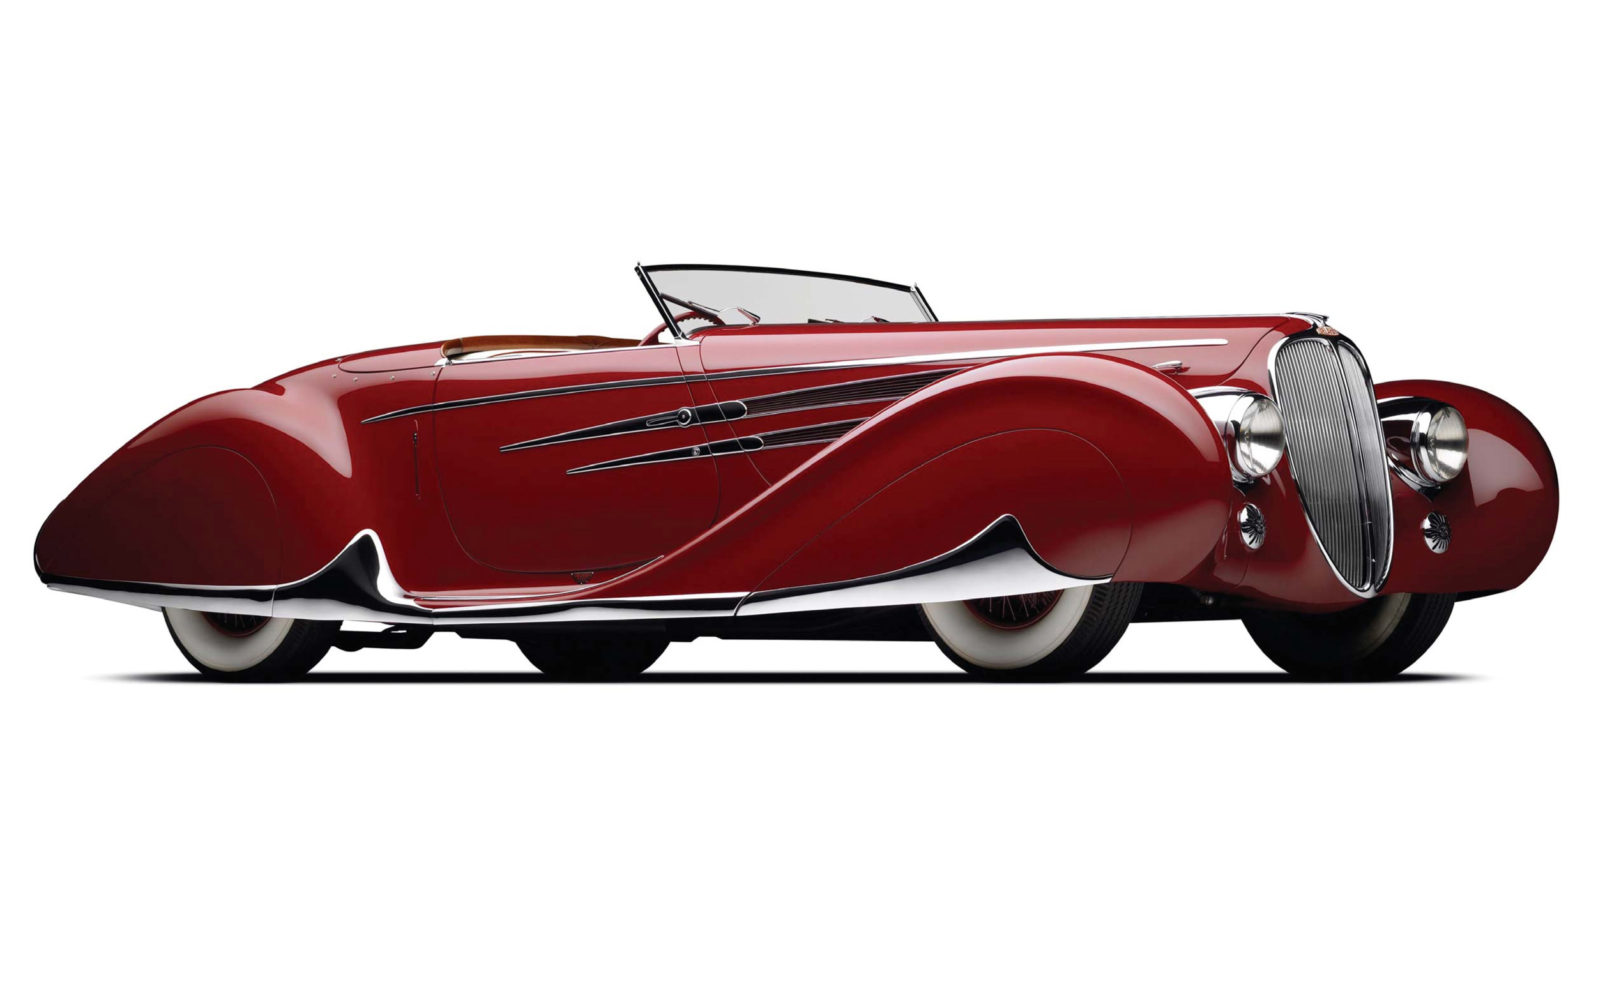 Sixty Exceptional Cars to tell the Story of the Automobile at the 2014 Concours of Elegance